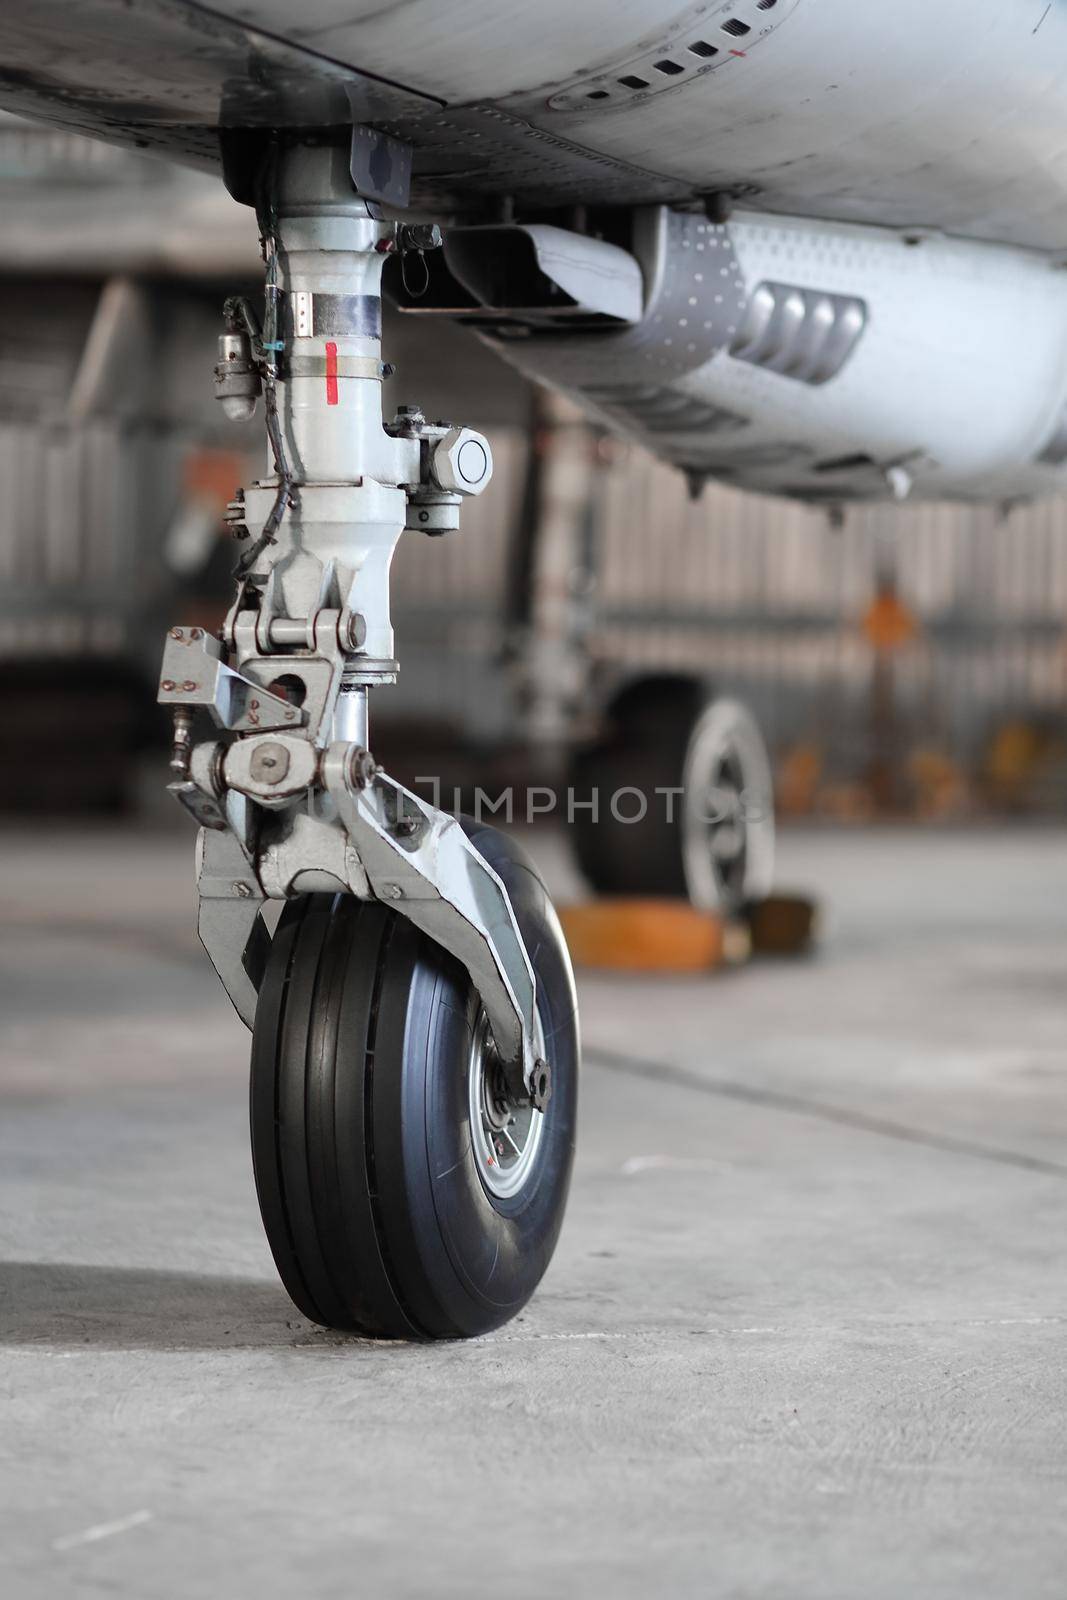 Front landing gear of aircraft on the ground